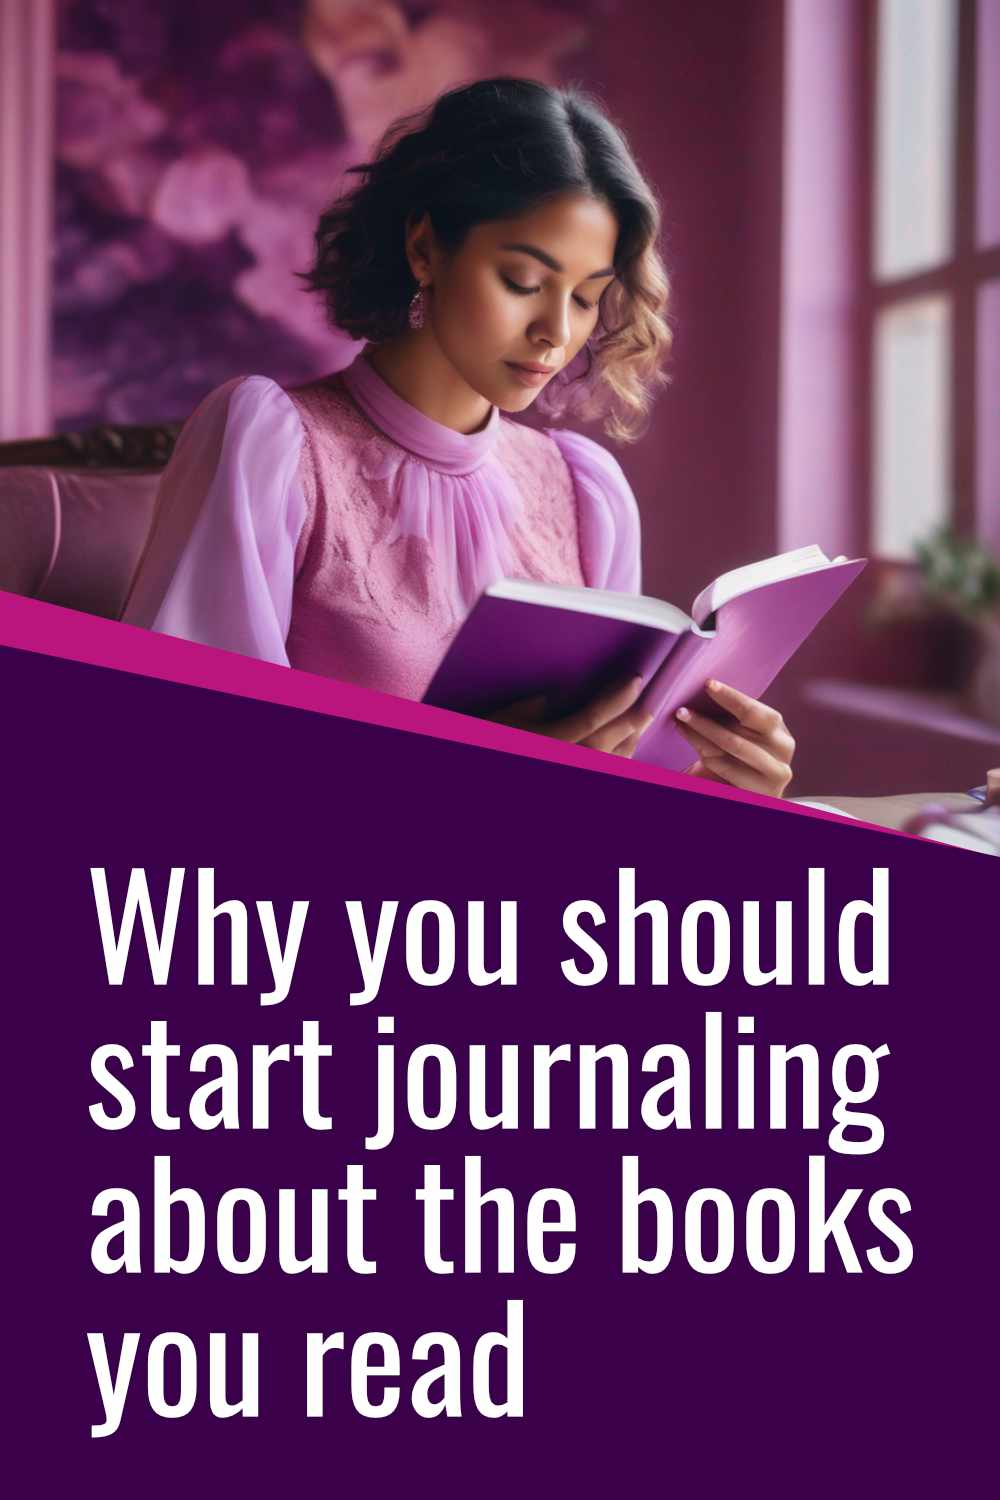 Benefits of journaling about the books you read.